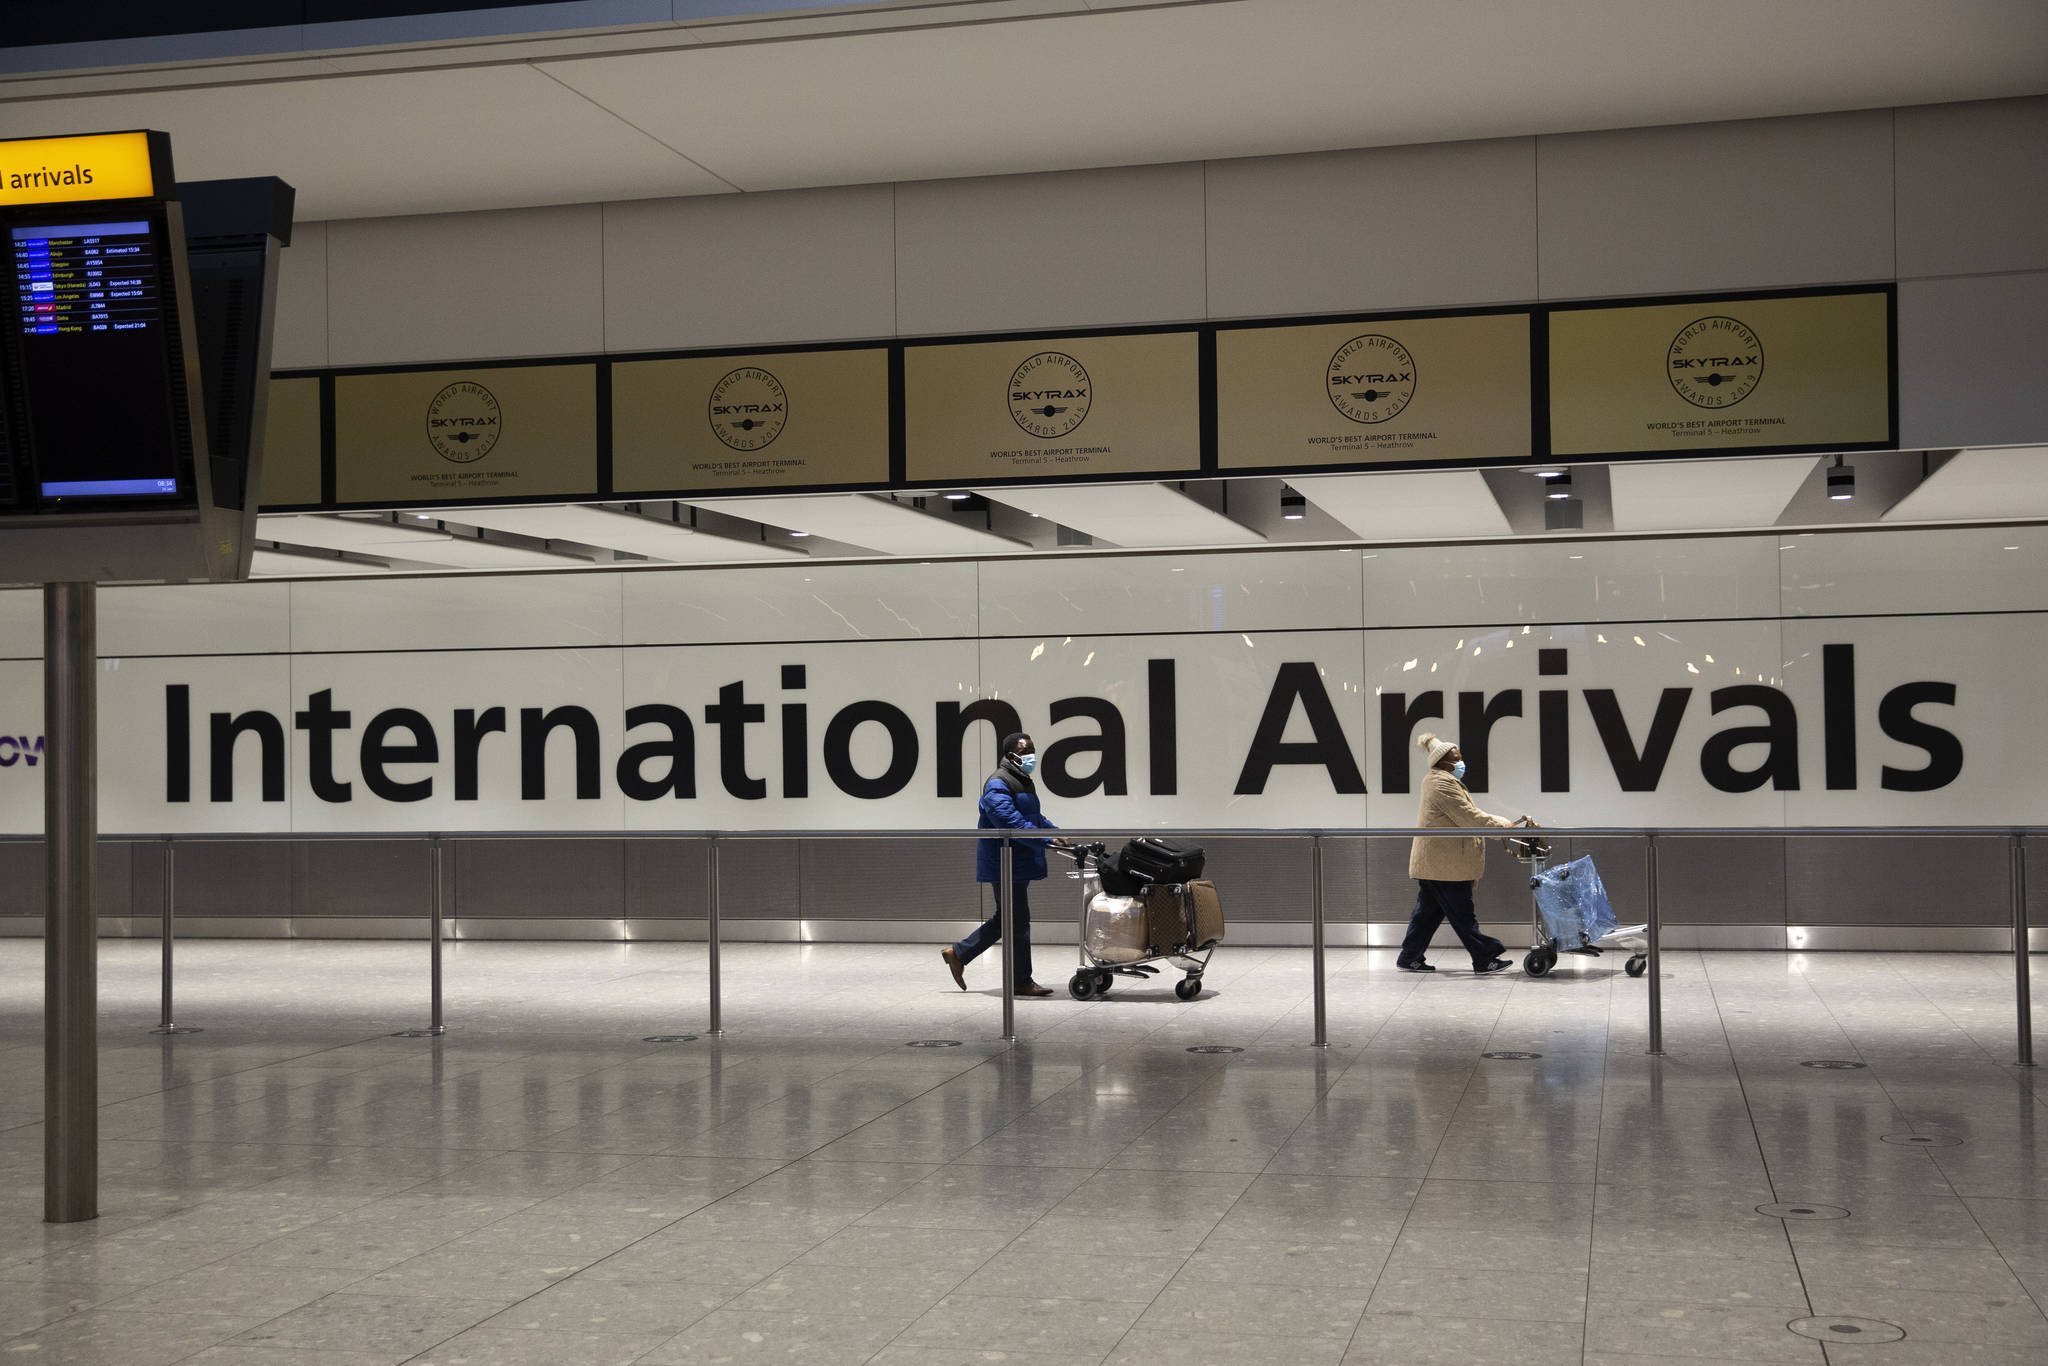 Arriving passengers walk past a sign in the arrivals area at Heathrow Airport in London, during England’s third national lockdown since the coronavirus outbreak began. On Tuesday, City and Borough of Juneau officials said the city has confirmed the first local case of a COVID-19 variant first detected in Britain. (AP Photo/Matt Dunham)